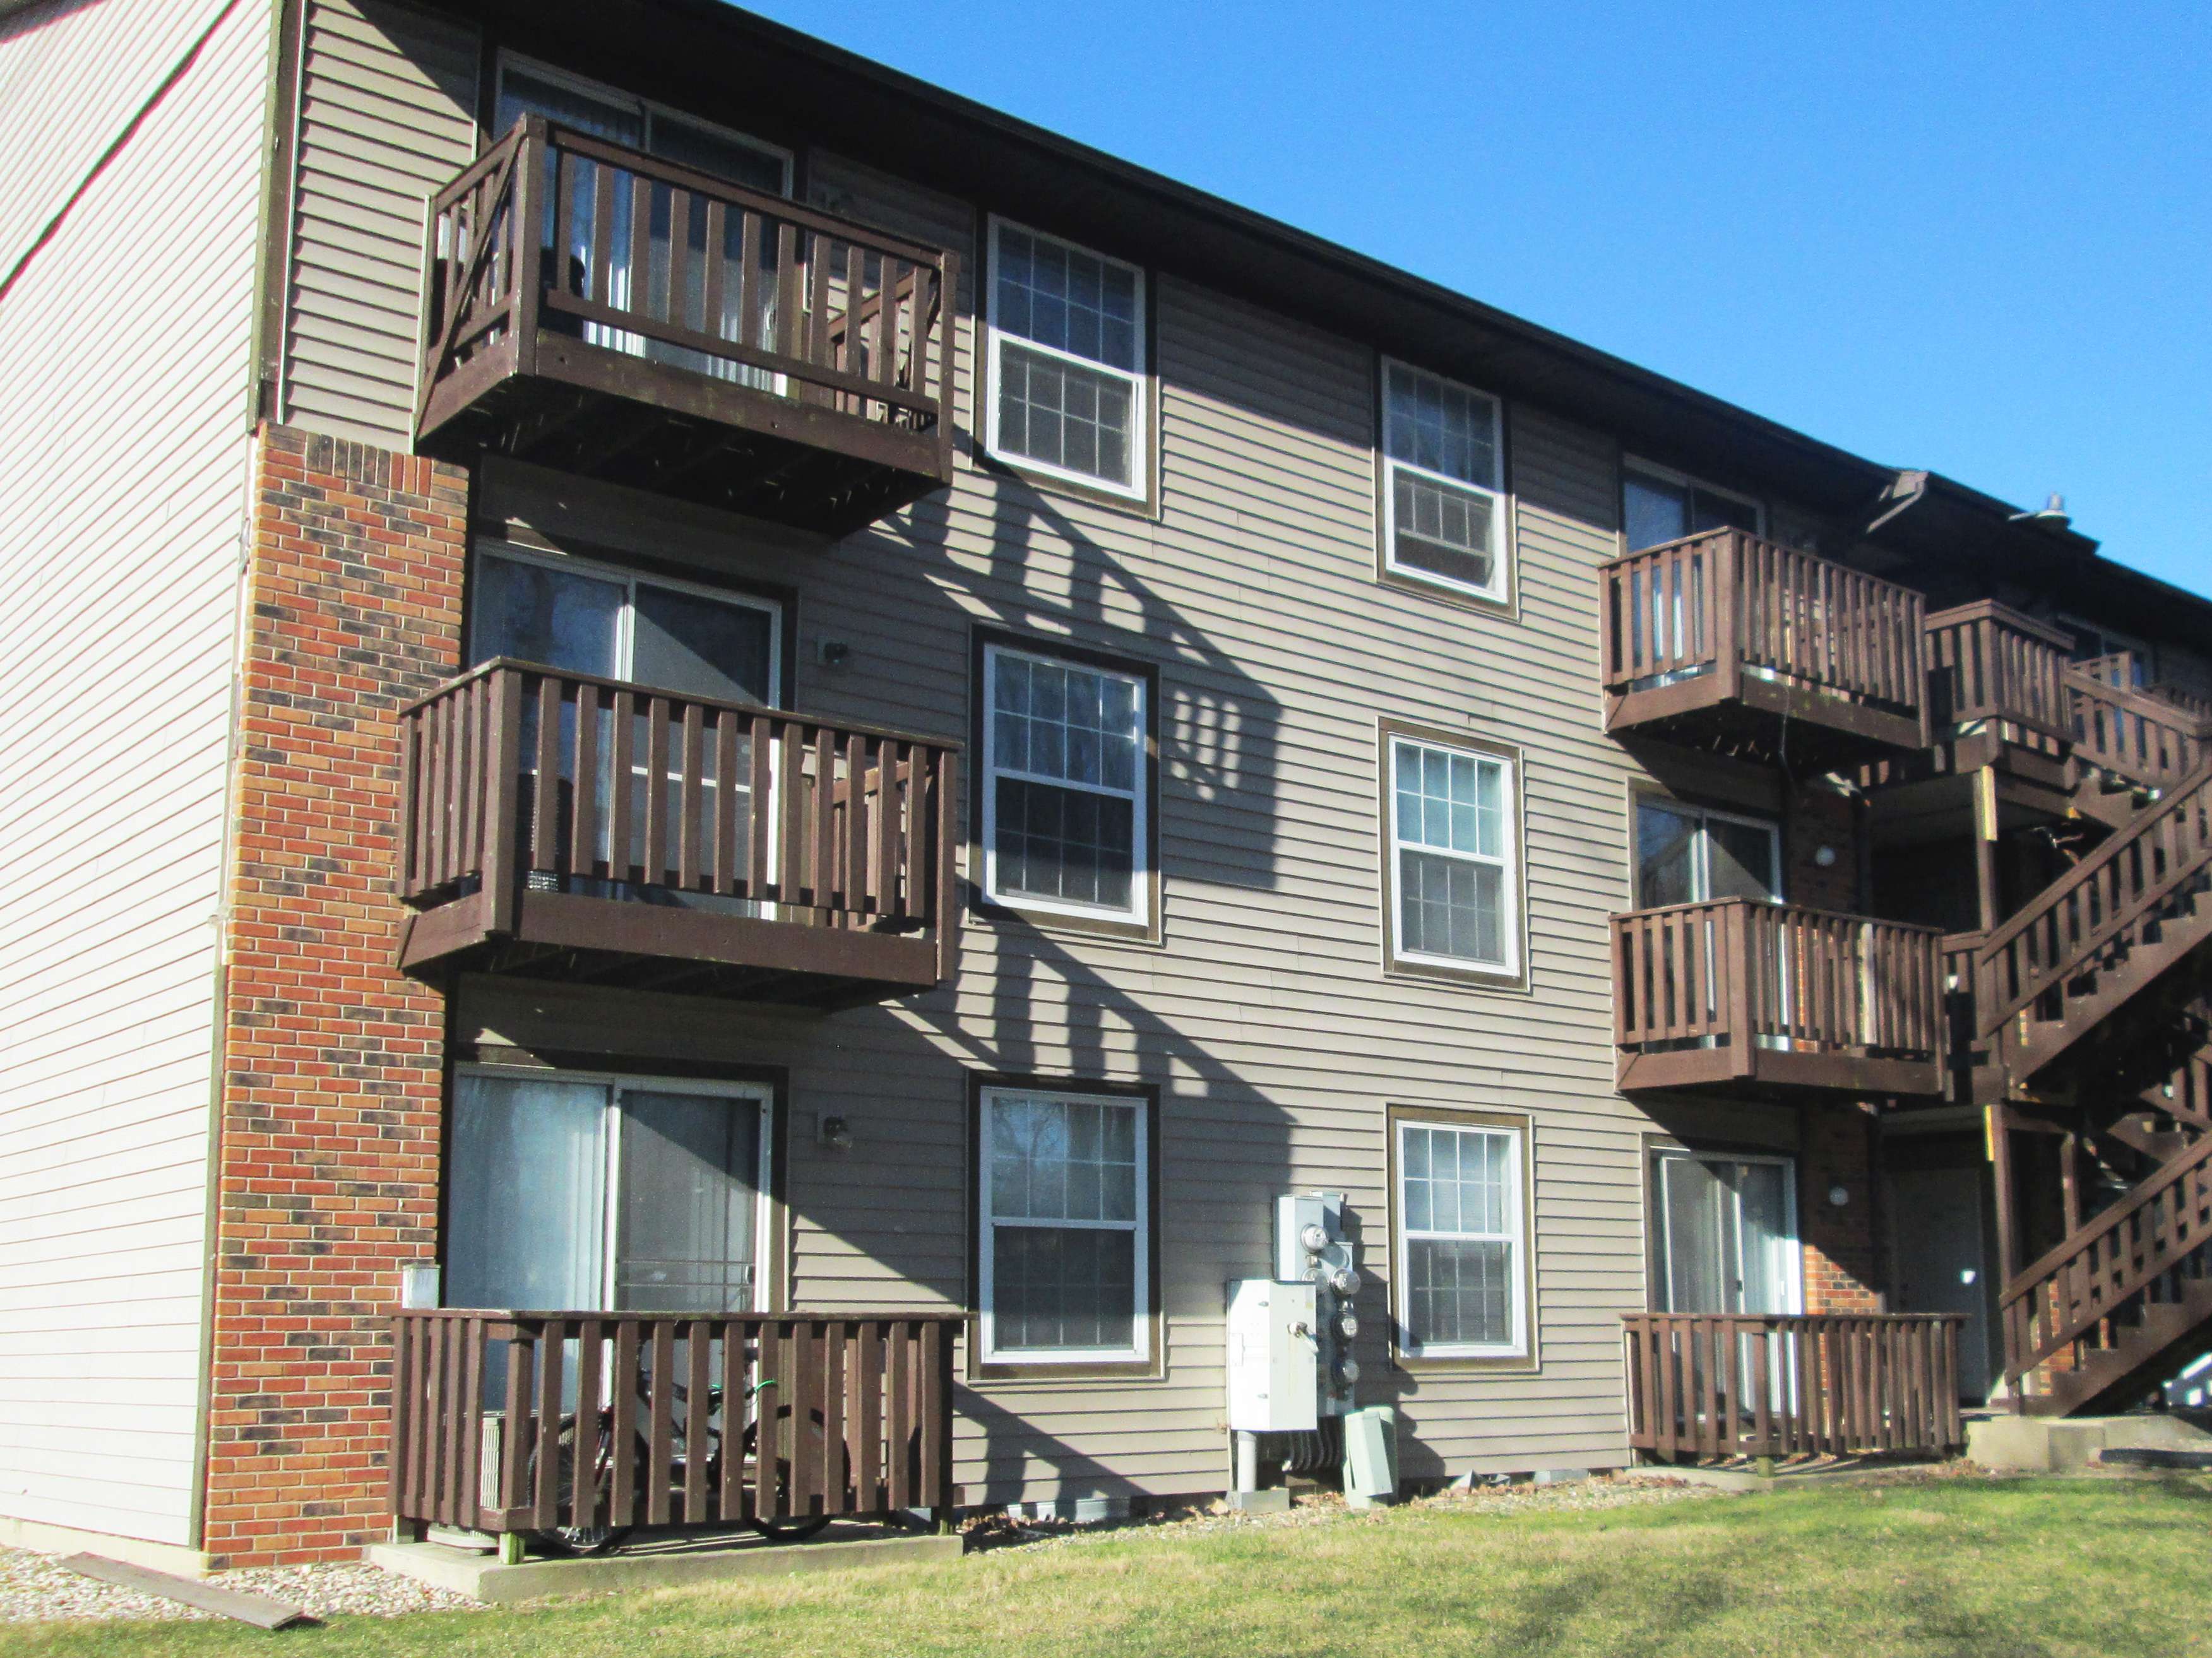 find-apartments/Crewview/320-Brown-Street-802-West-Lafayette/1457